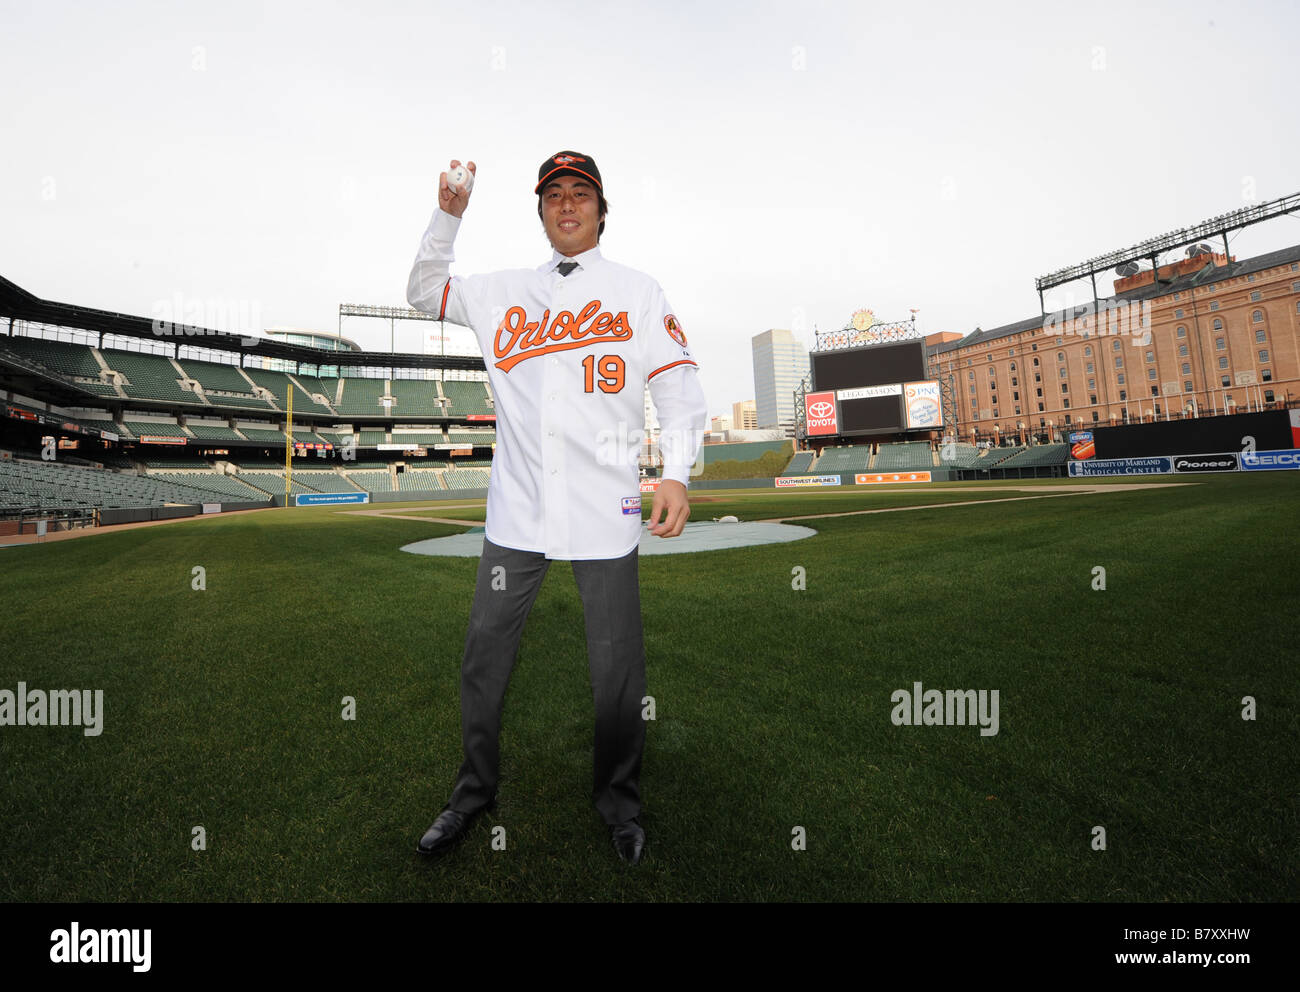 Koji Uehara Orioles JANUARY 14 2009 MLB New Baltimore Orioles pitcher Koji Uehara attends a new signing presentation at Oriole Park at Camden Yards in Baltimore MD USA Photo by AFLO 2324 Stock Photo